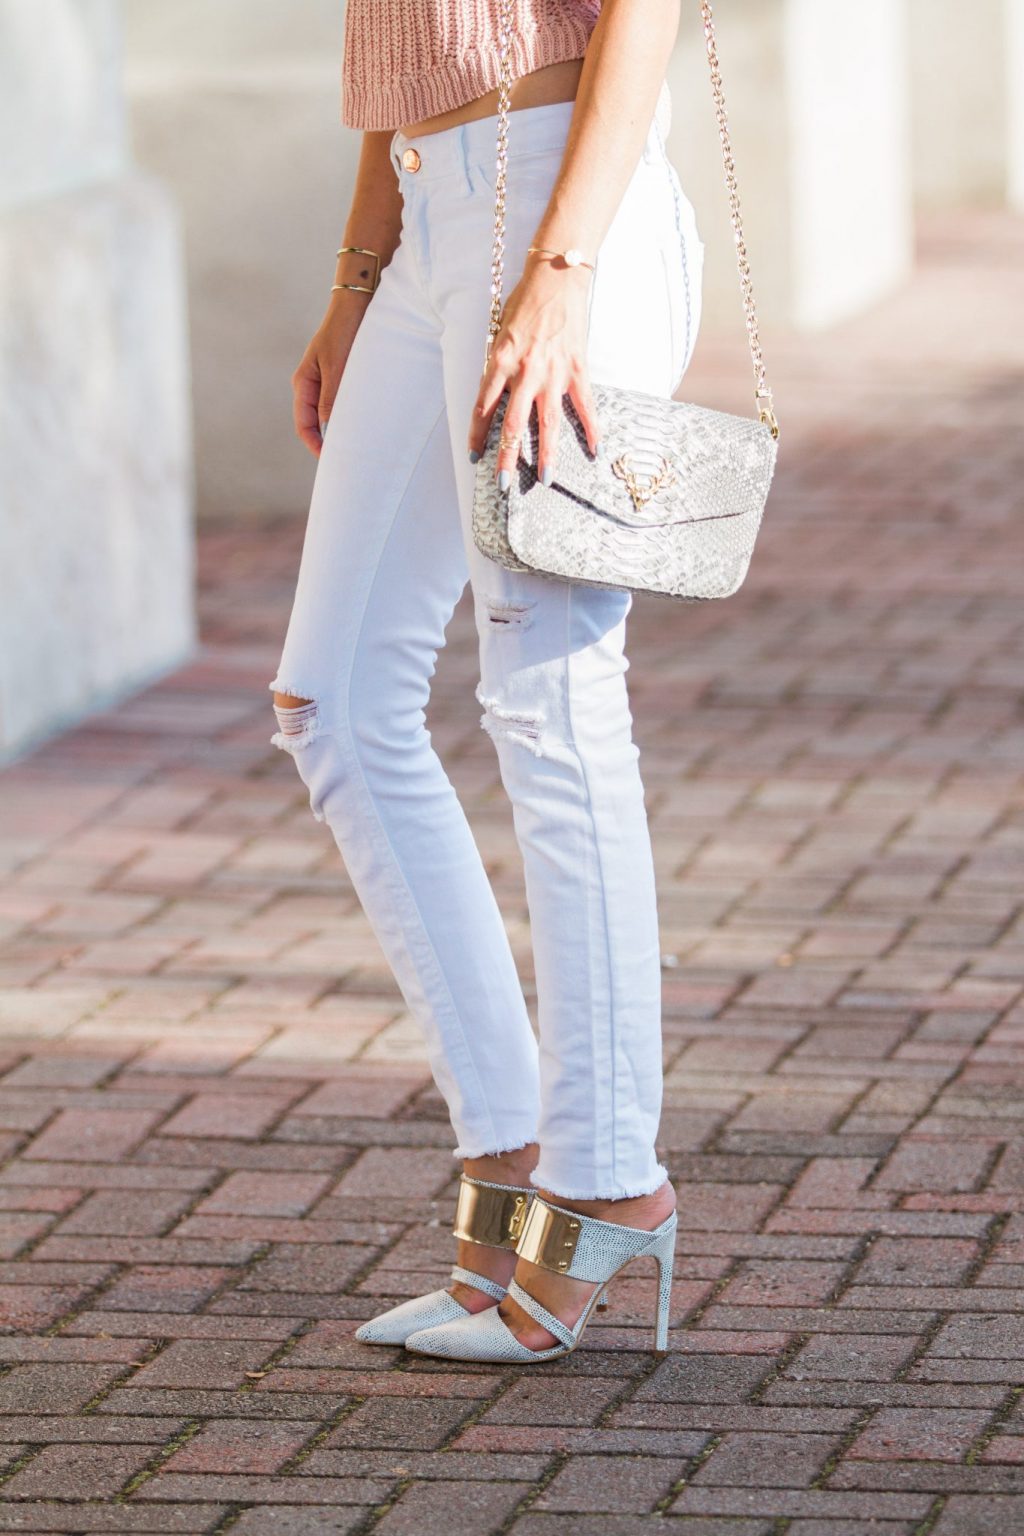 pink and white, casual elegance, stylish summer outfits, taxidermy bags, how to style white ripped jeans, lush to blush, atlanta style blogger, trendy style, glam weekend looks, python crossbody